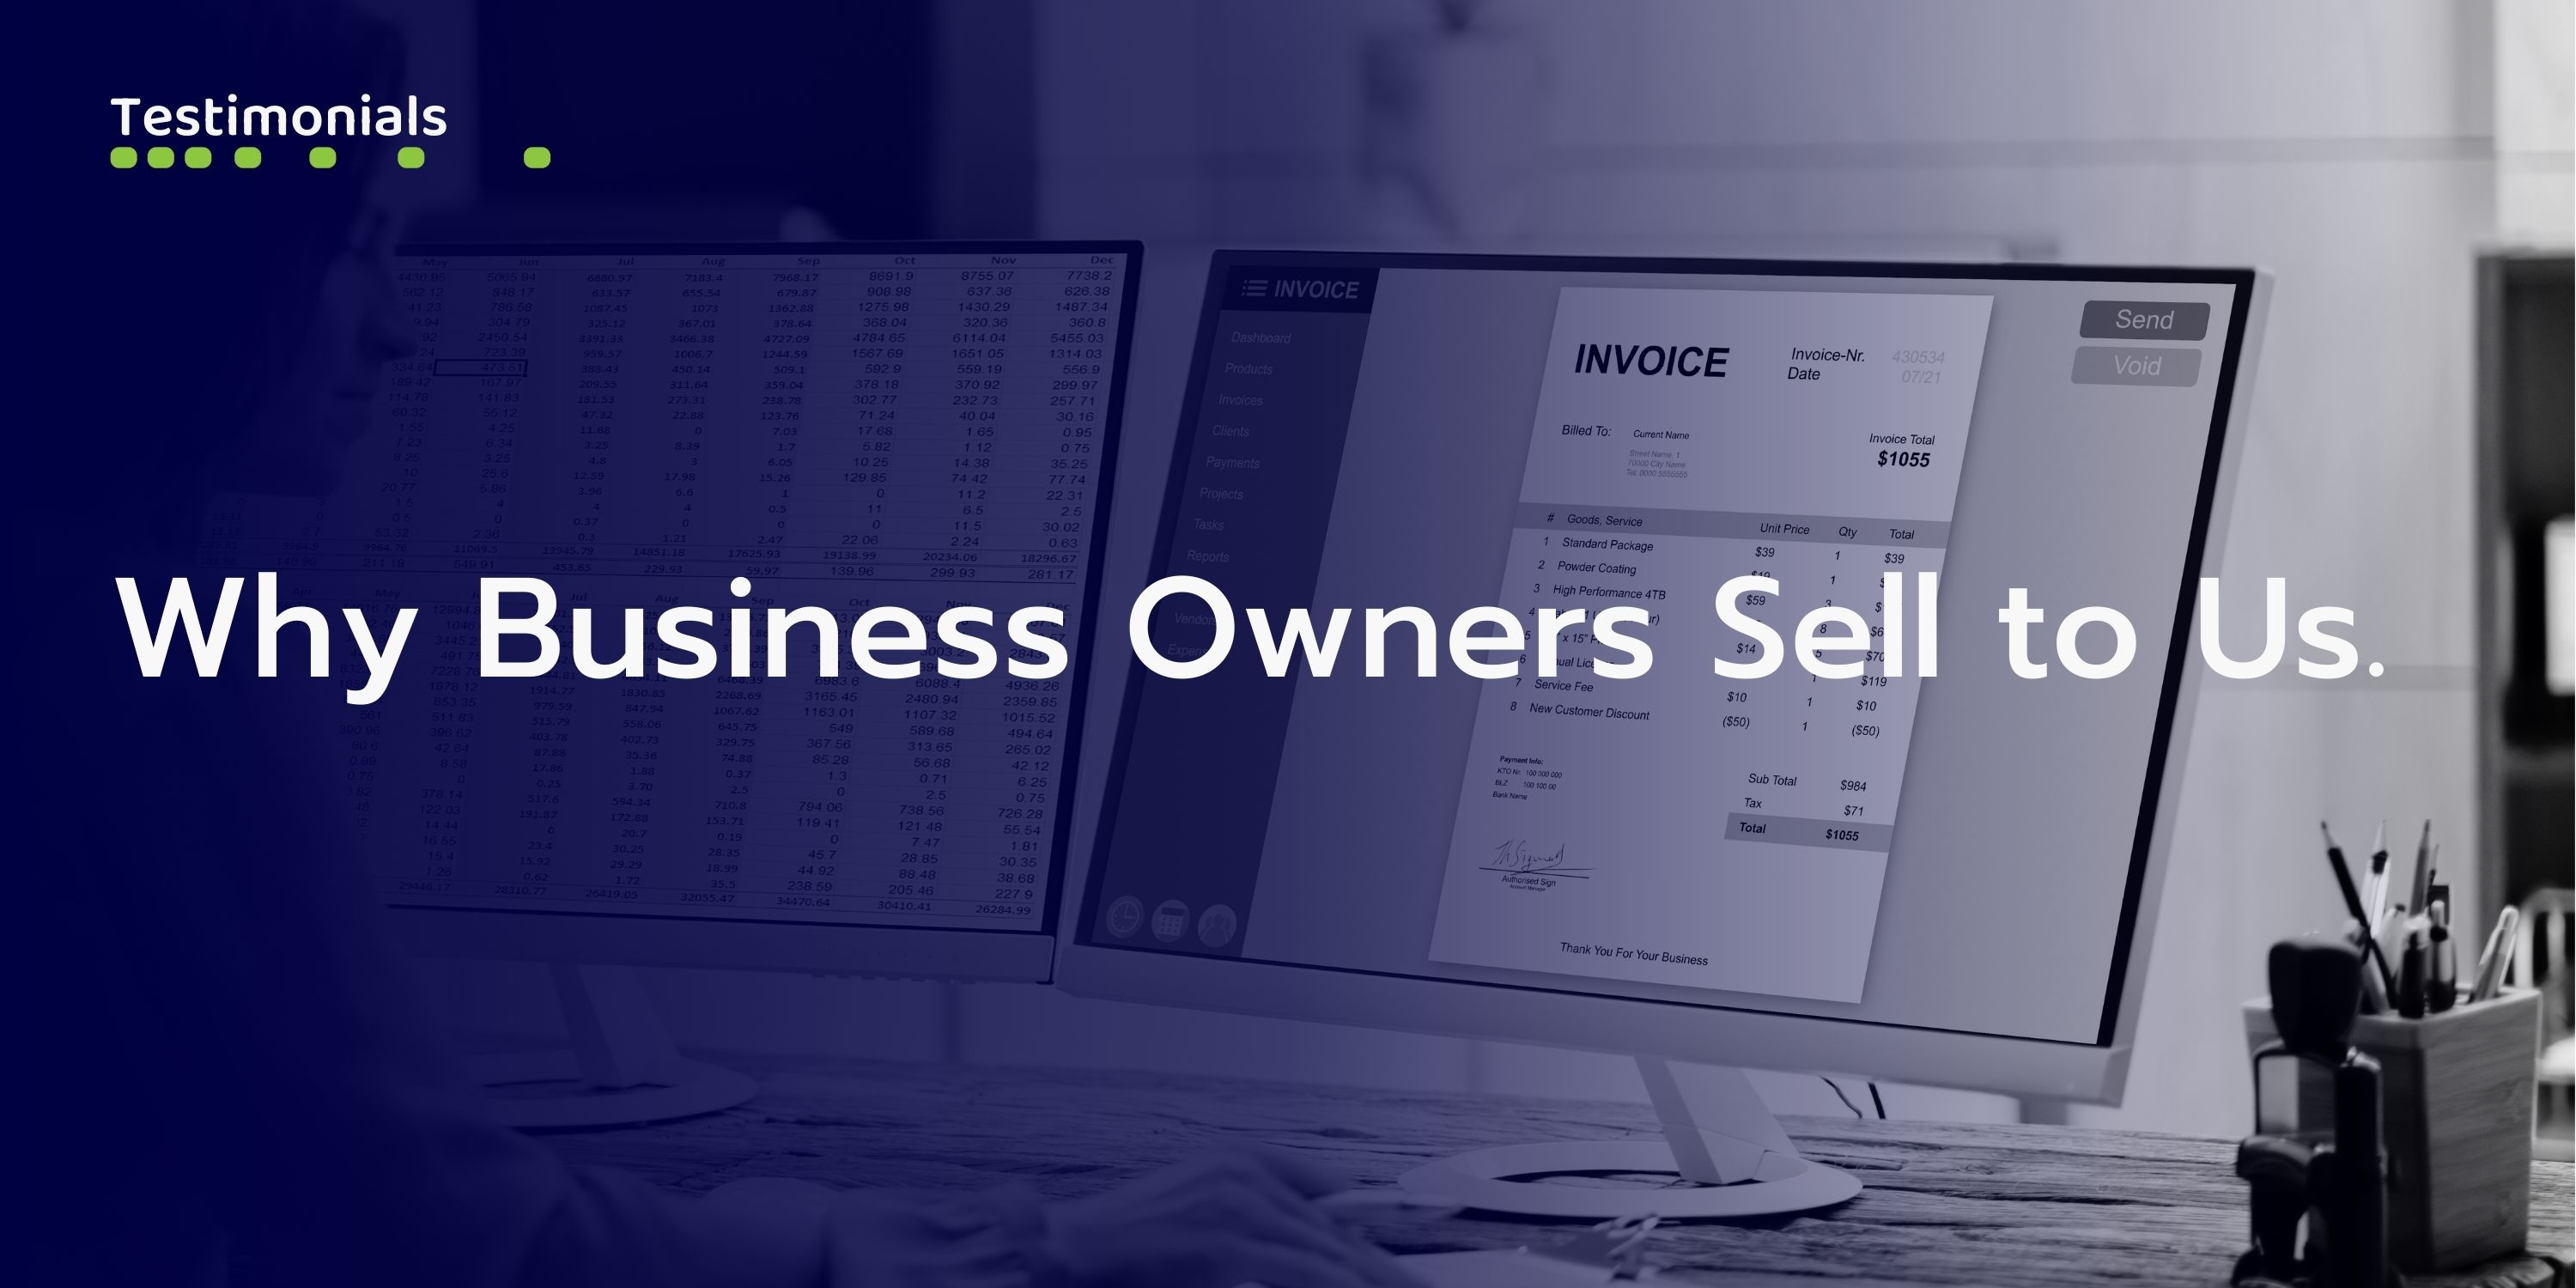 Why business owners sell to us